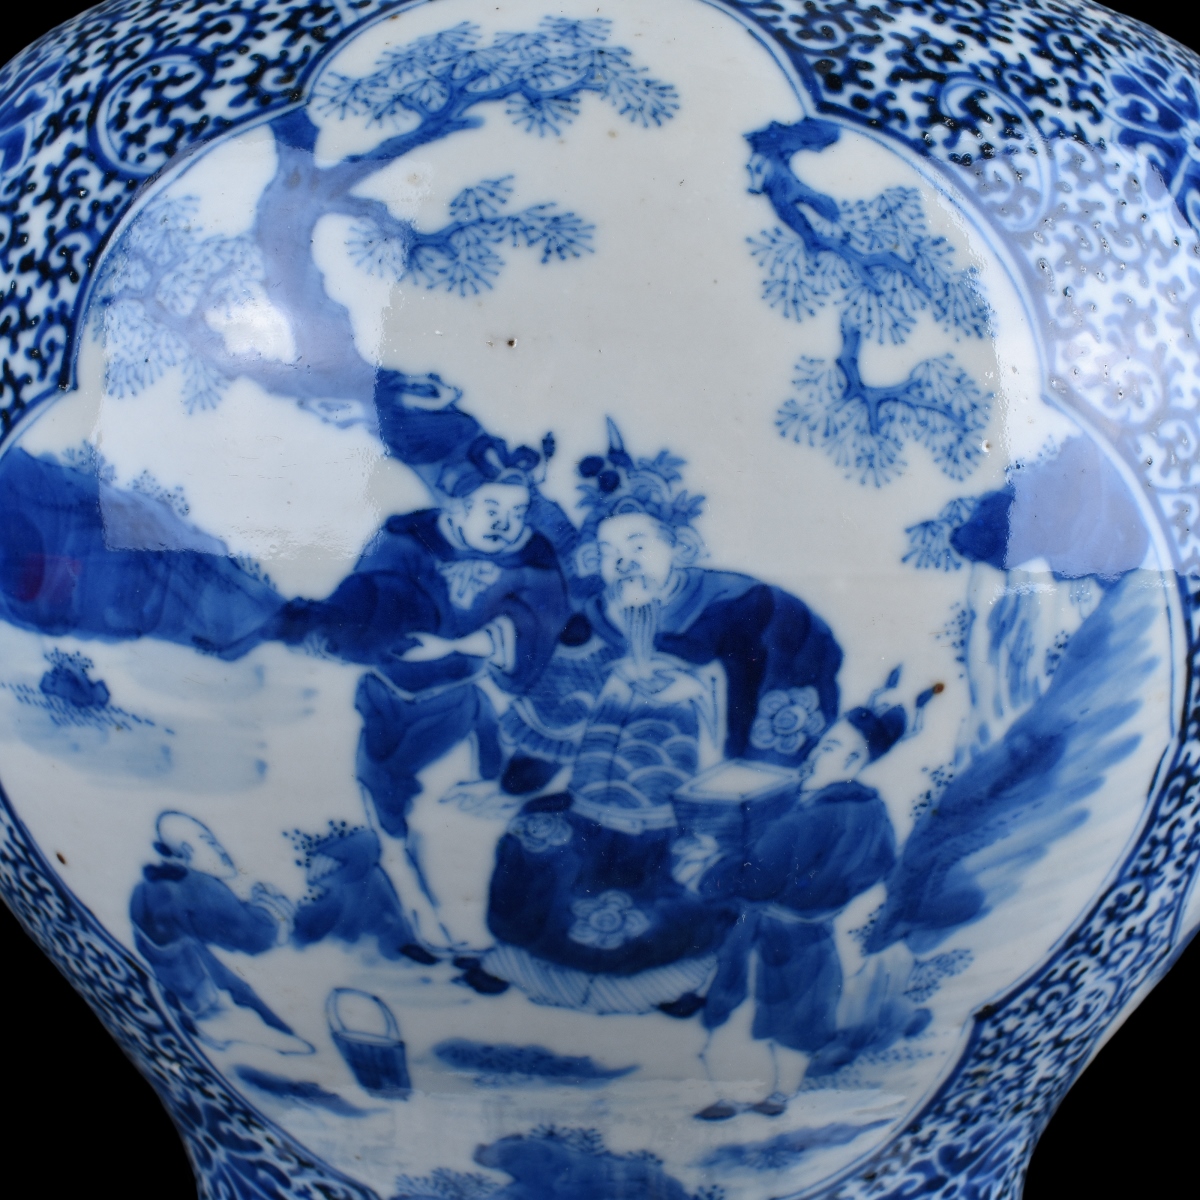 Pair of Chinese Blue and White Porcelain Jars